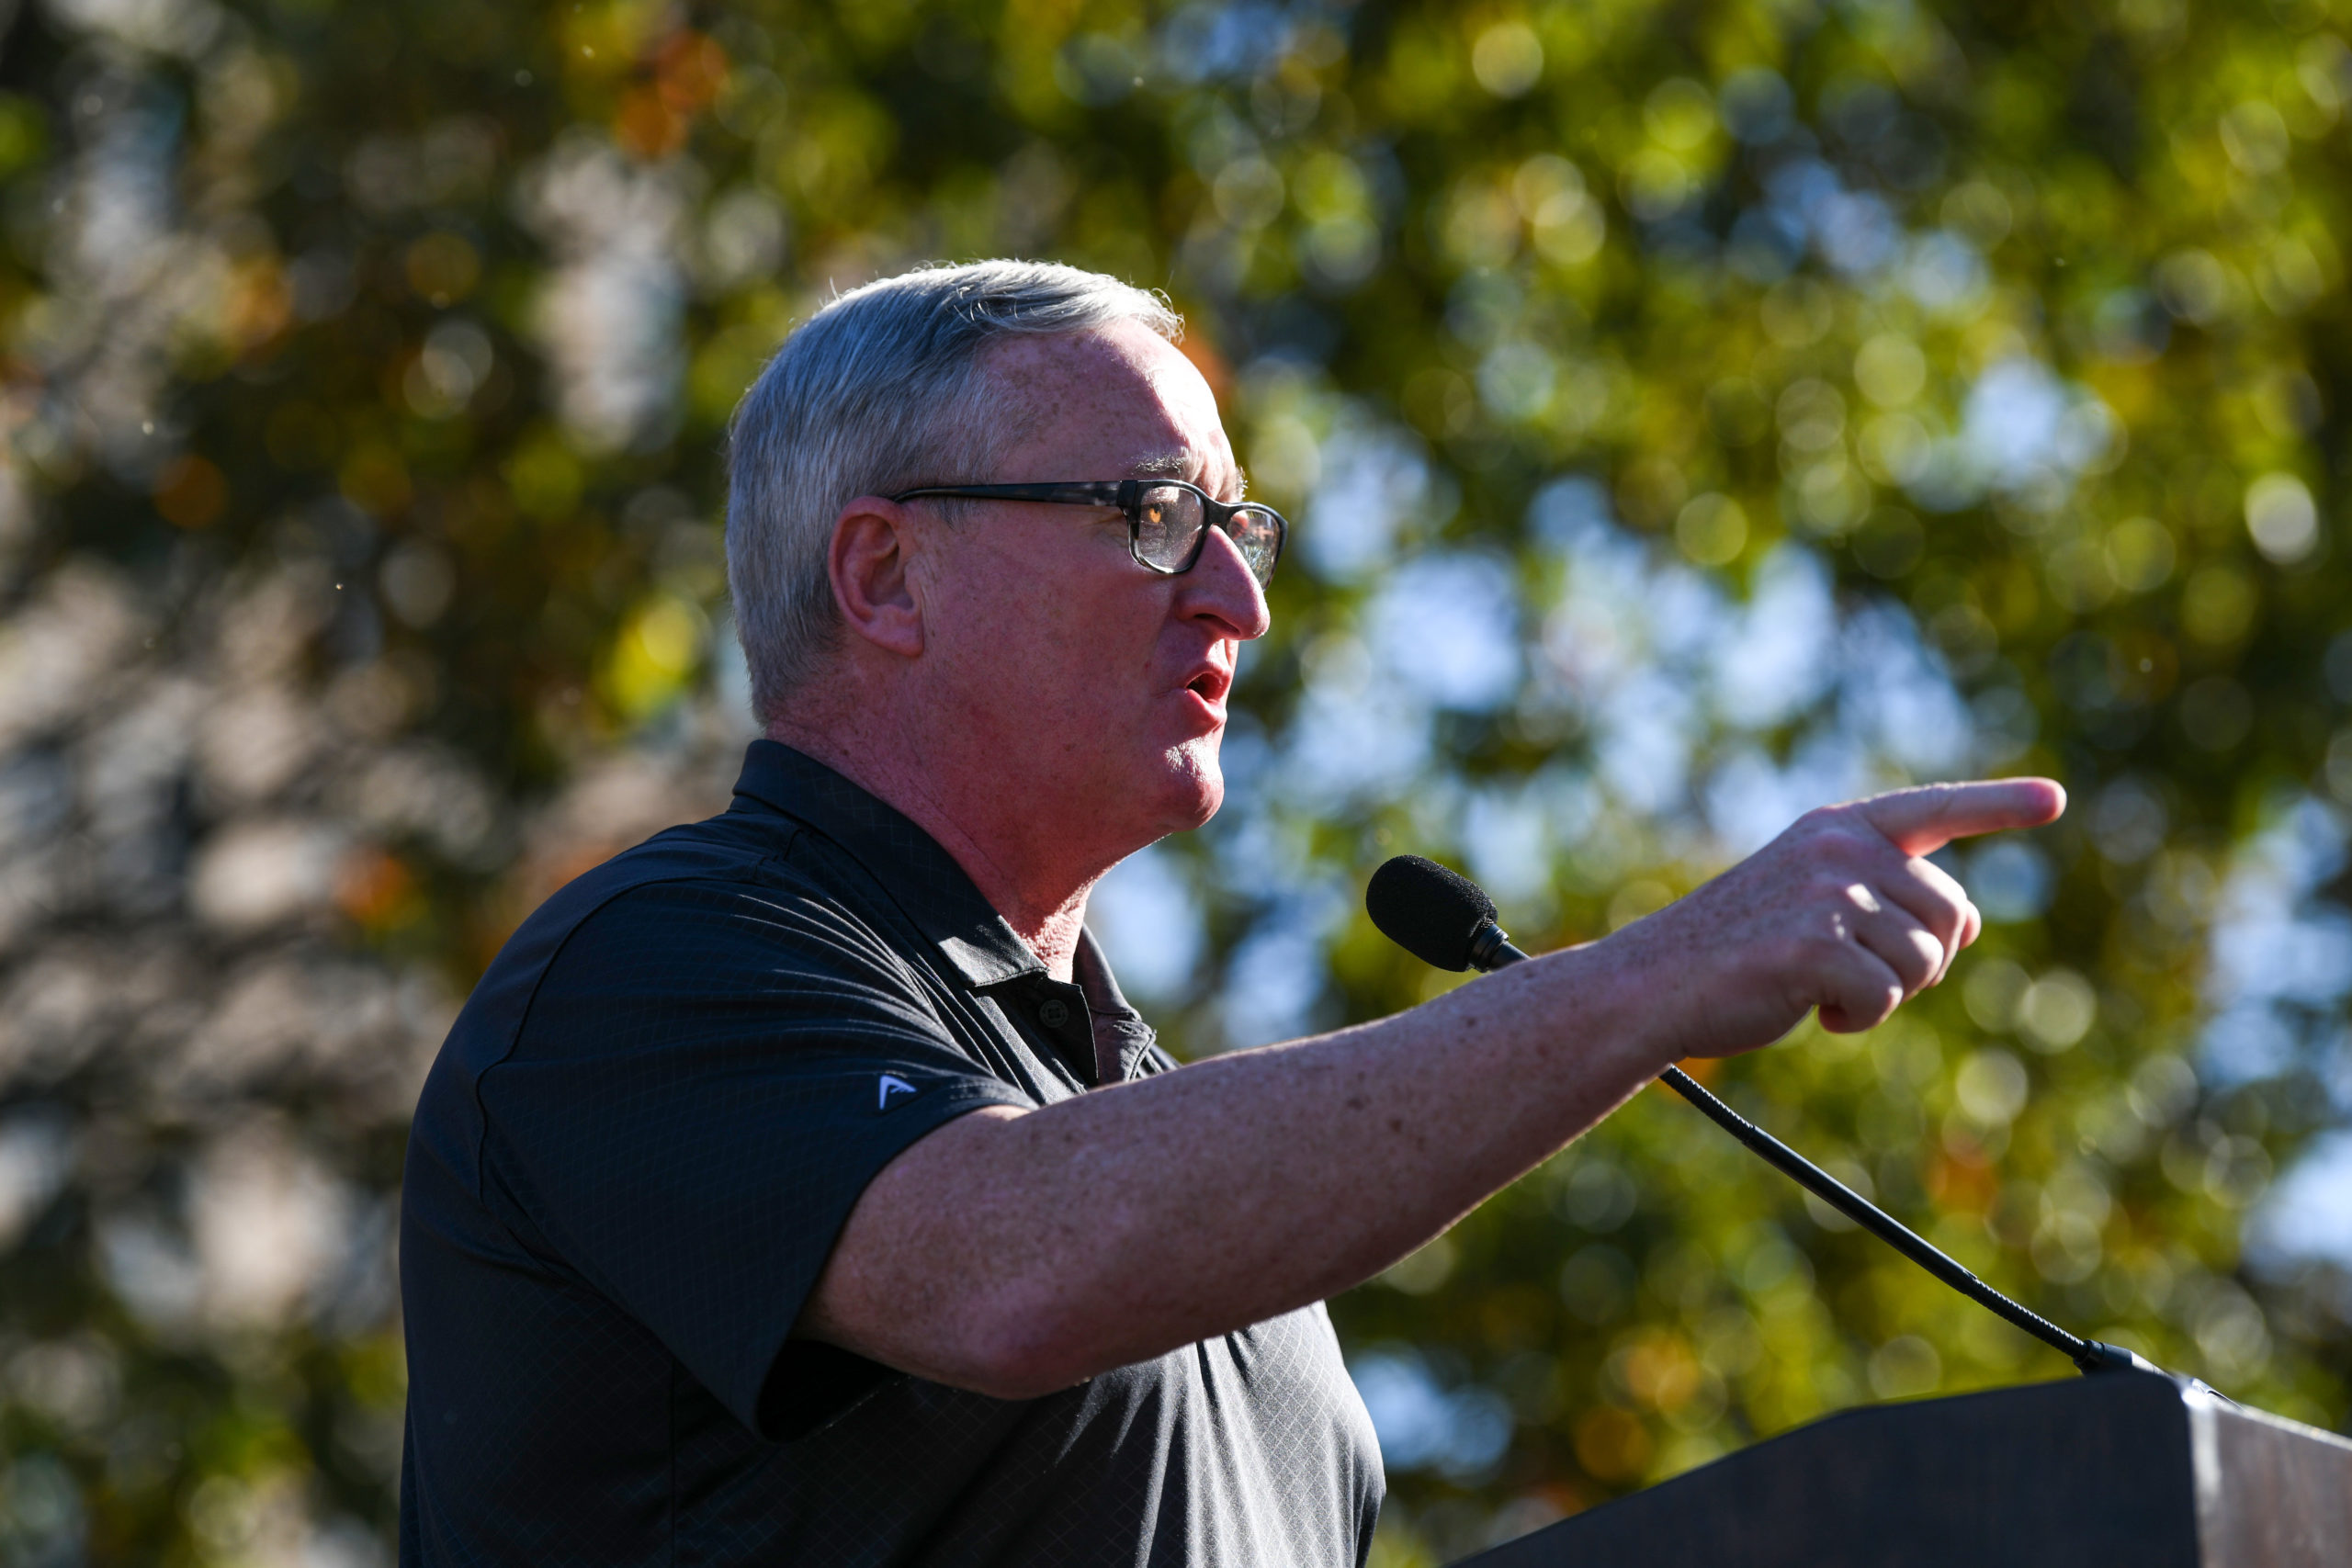 PHILADELPHIA, PENNSYLVANIA - NOVEMBER 07: Philadelphia Mayor Jim Kenney speaks during the Count Every Vote Rally In Philadelphia at Independence Hall on November 07, 2020 in Philadelphia, Pennsylvania. (Photo by Bryan Bedder/Getty Images for MoveOn)